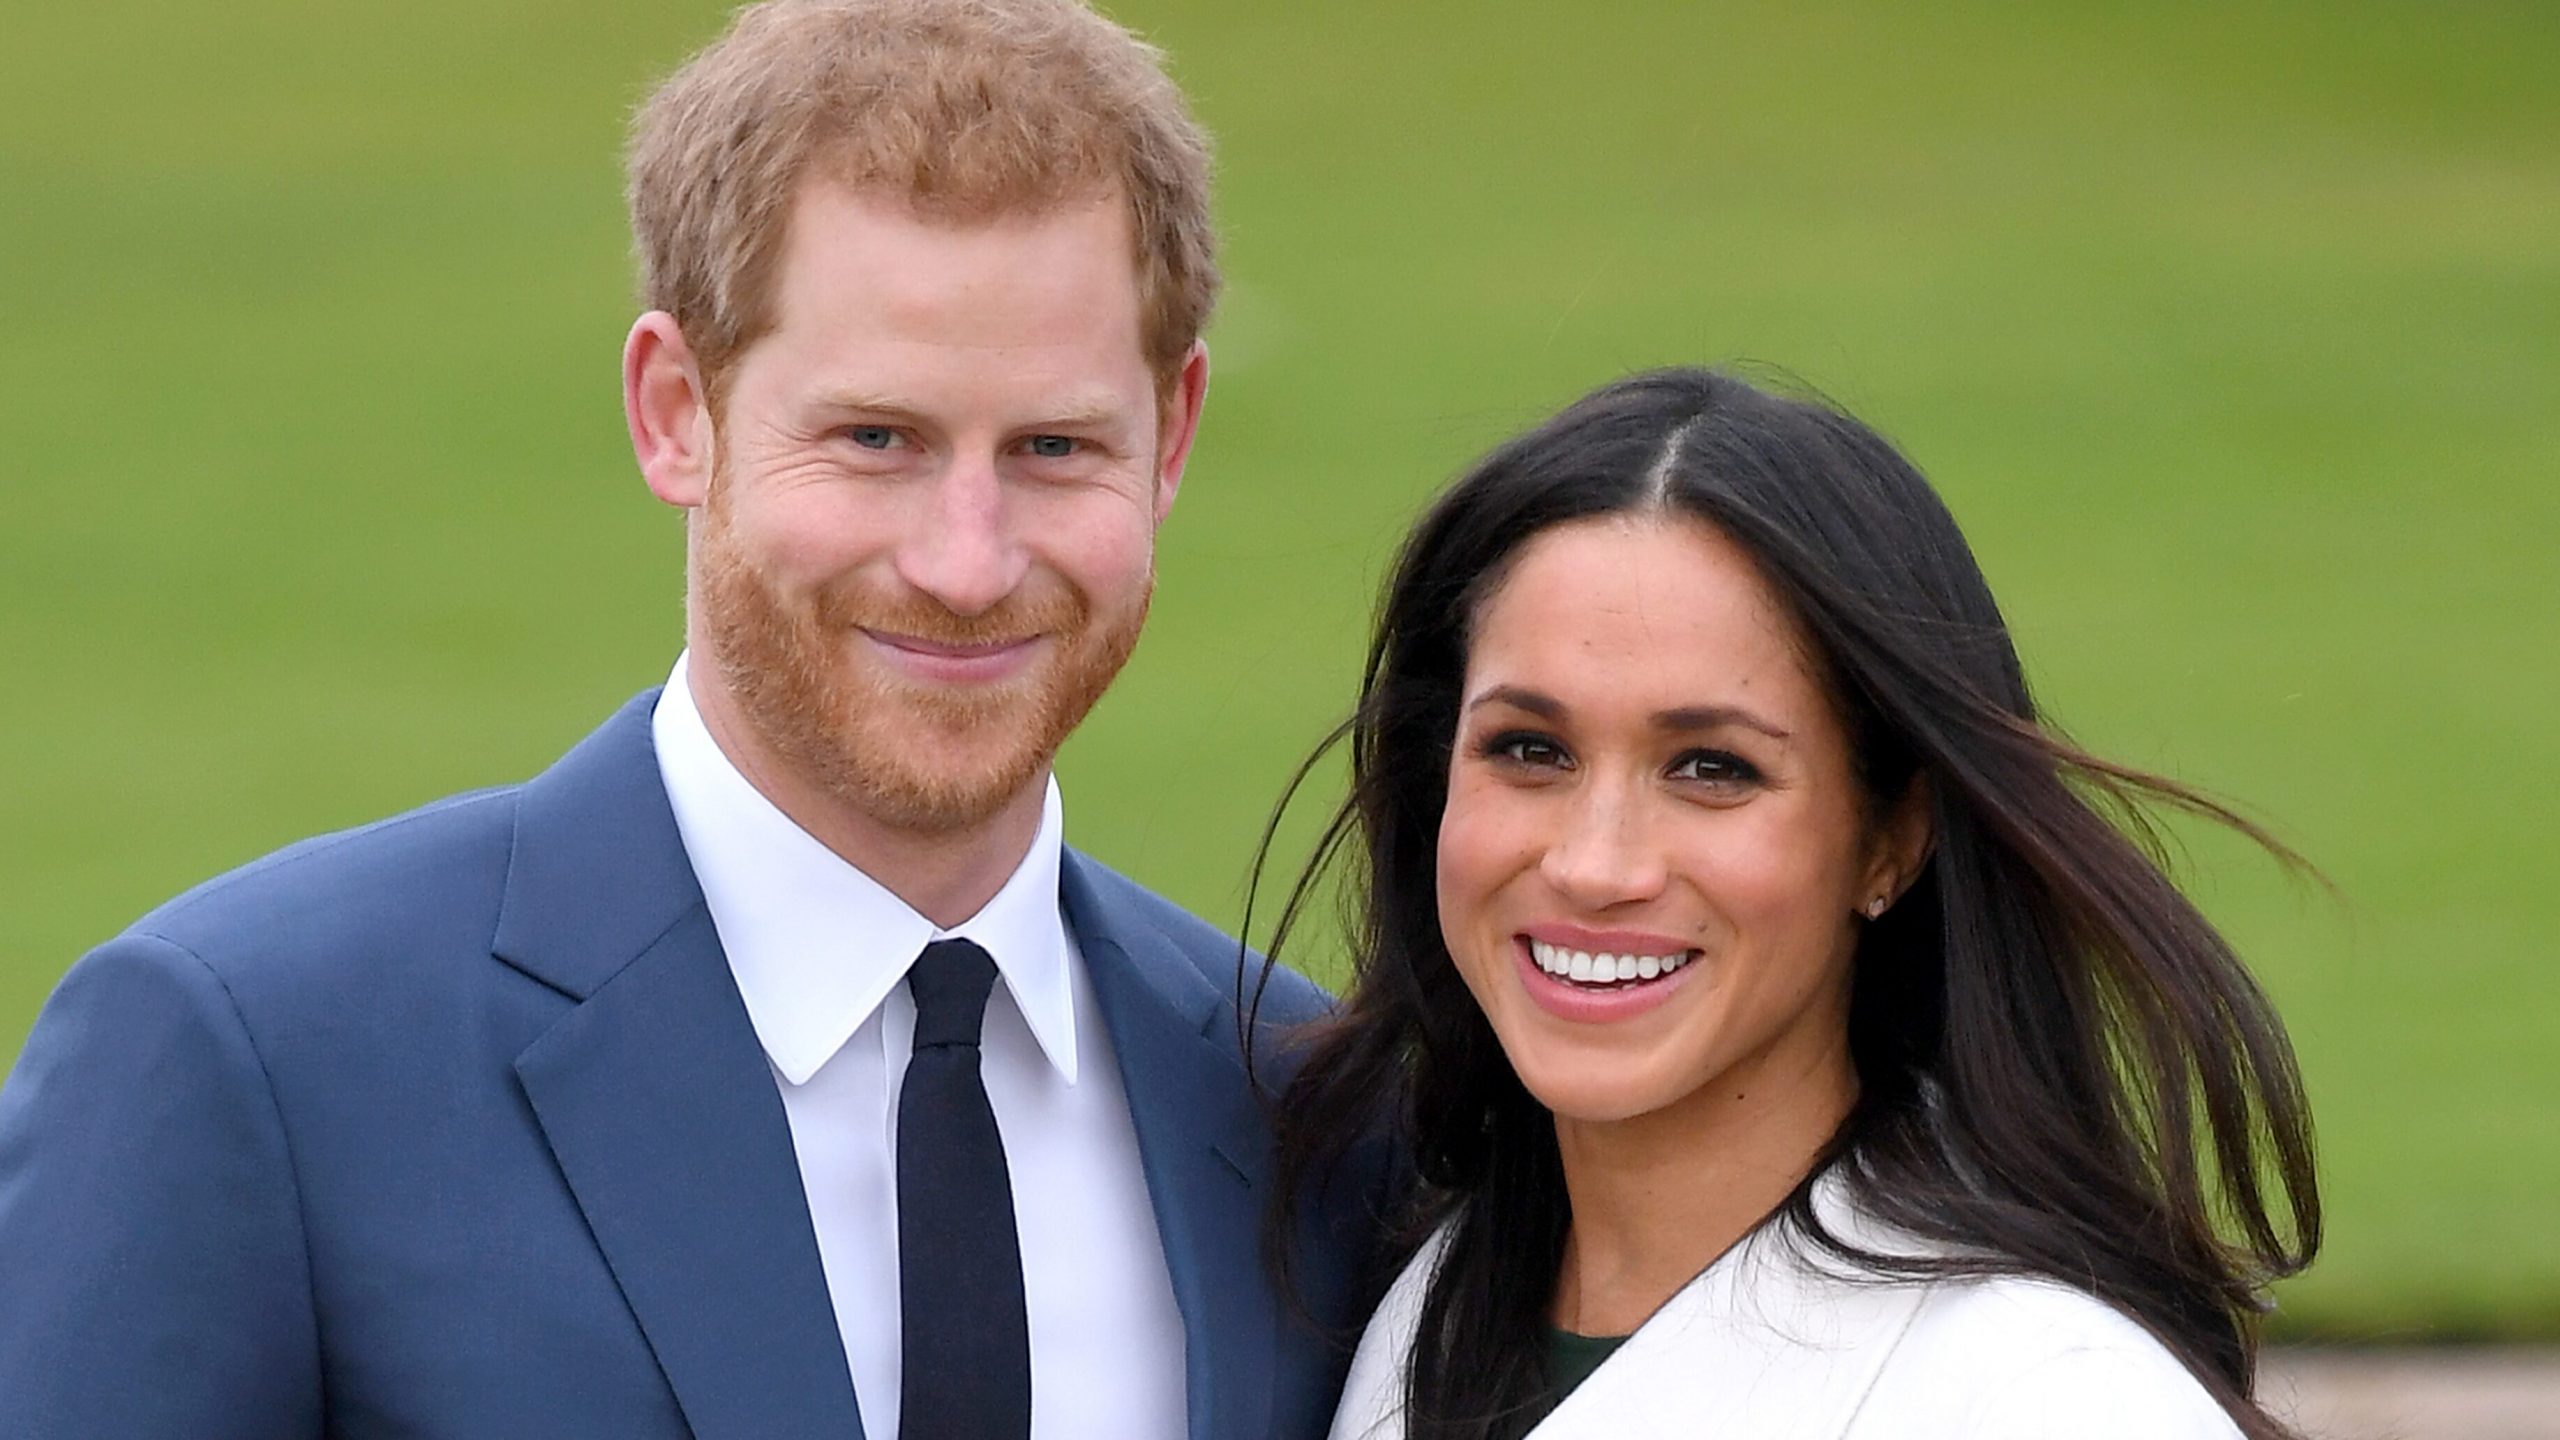 Why Meghan Markle, Prince Harry Likely Never Returns to Royal Life: An Expert